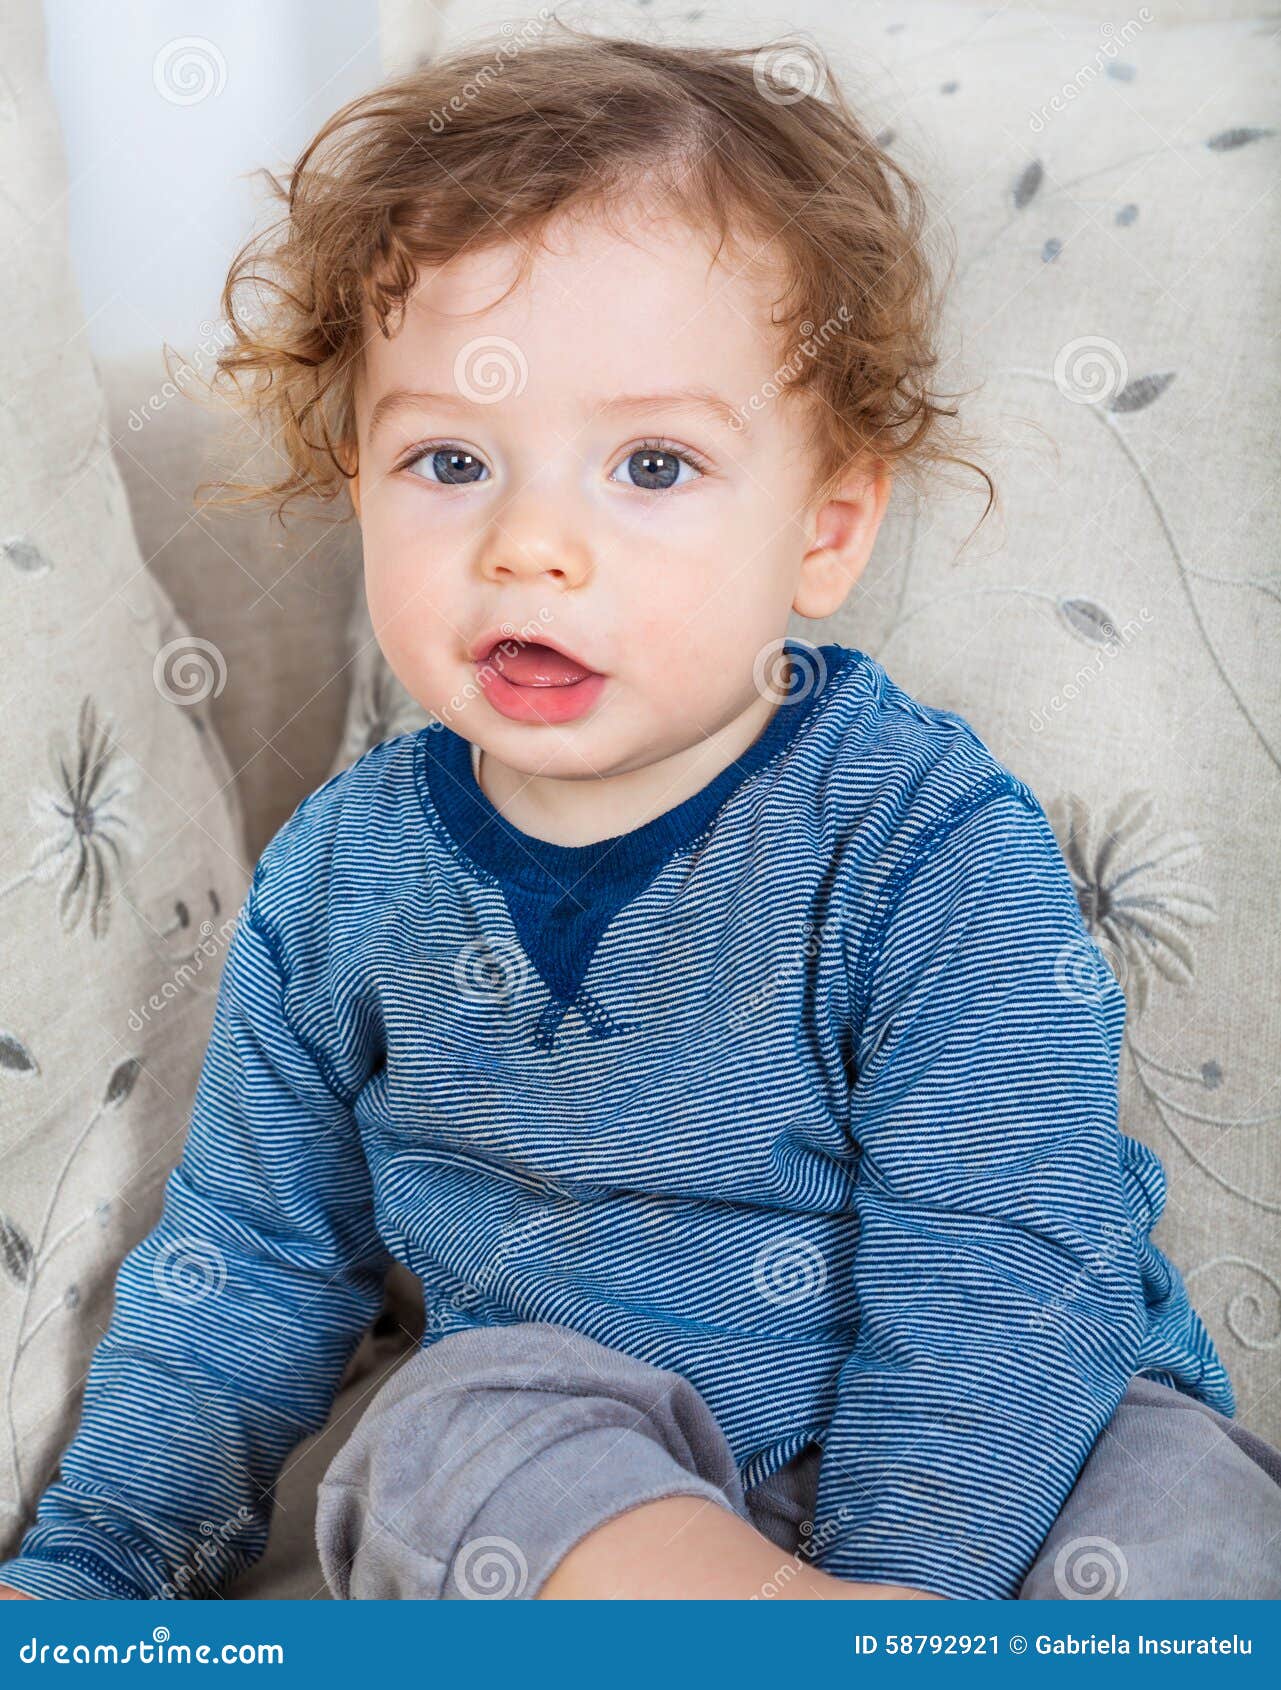 baby boy with curly hair stock image. image of infant - 58792921